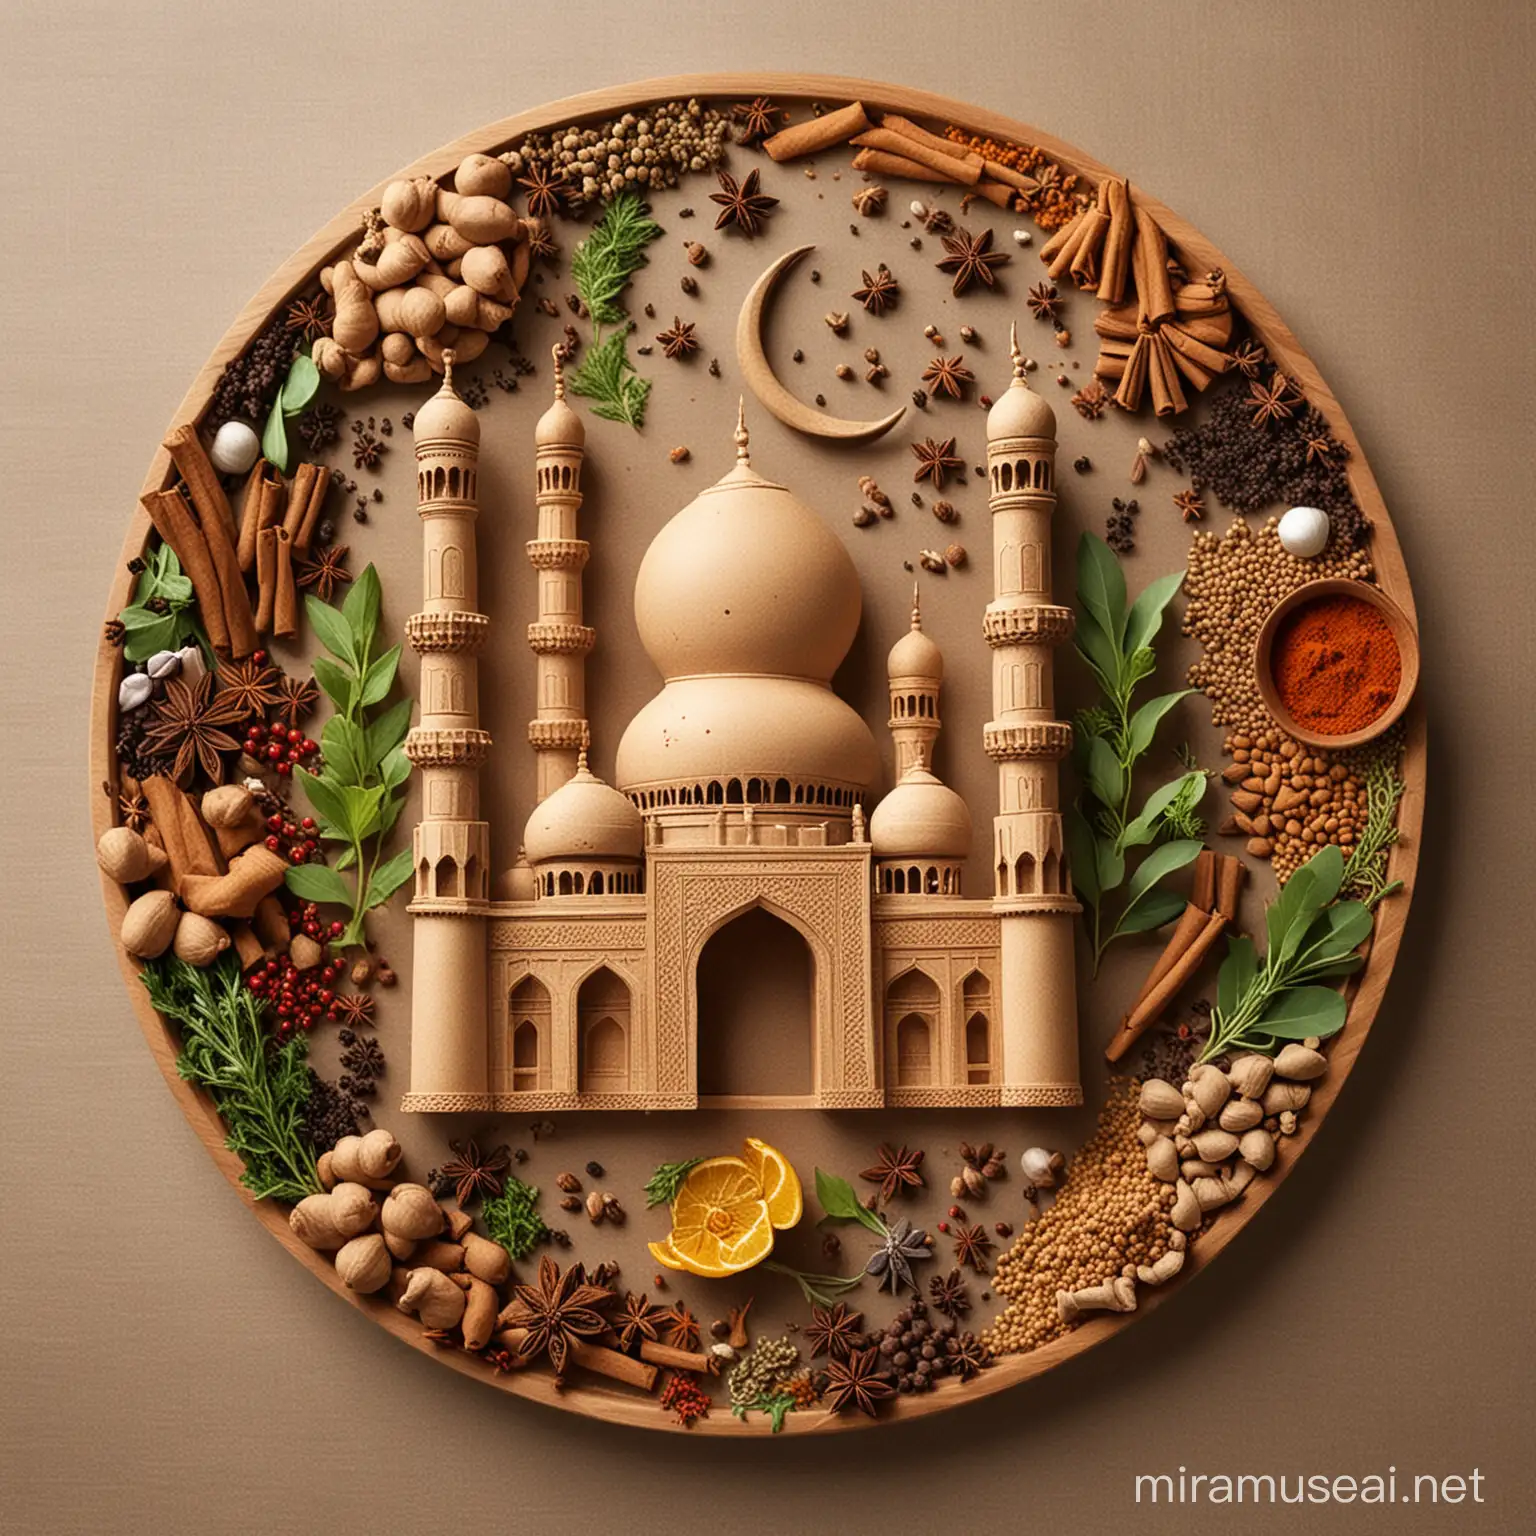 Eid Mubarak Night Celebration with Mosque and Traditional Spices